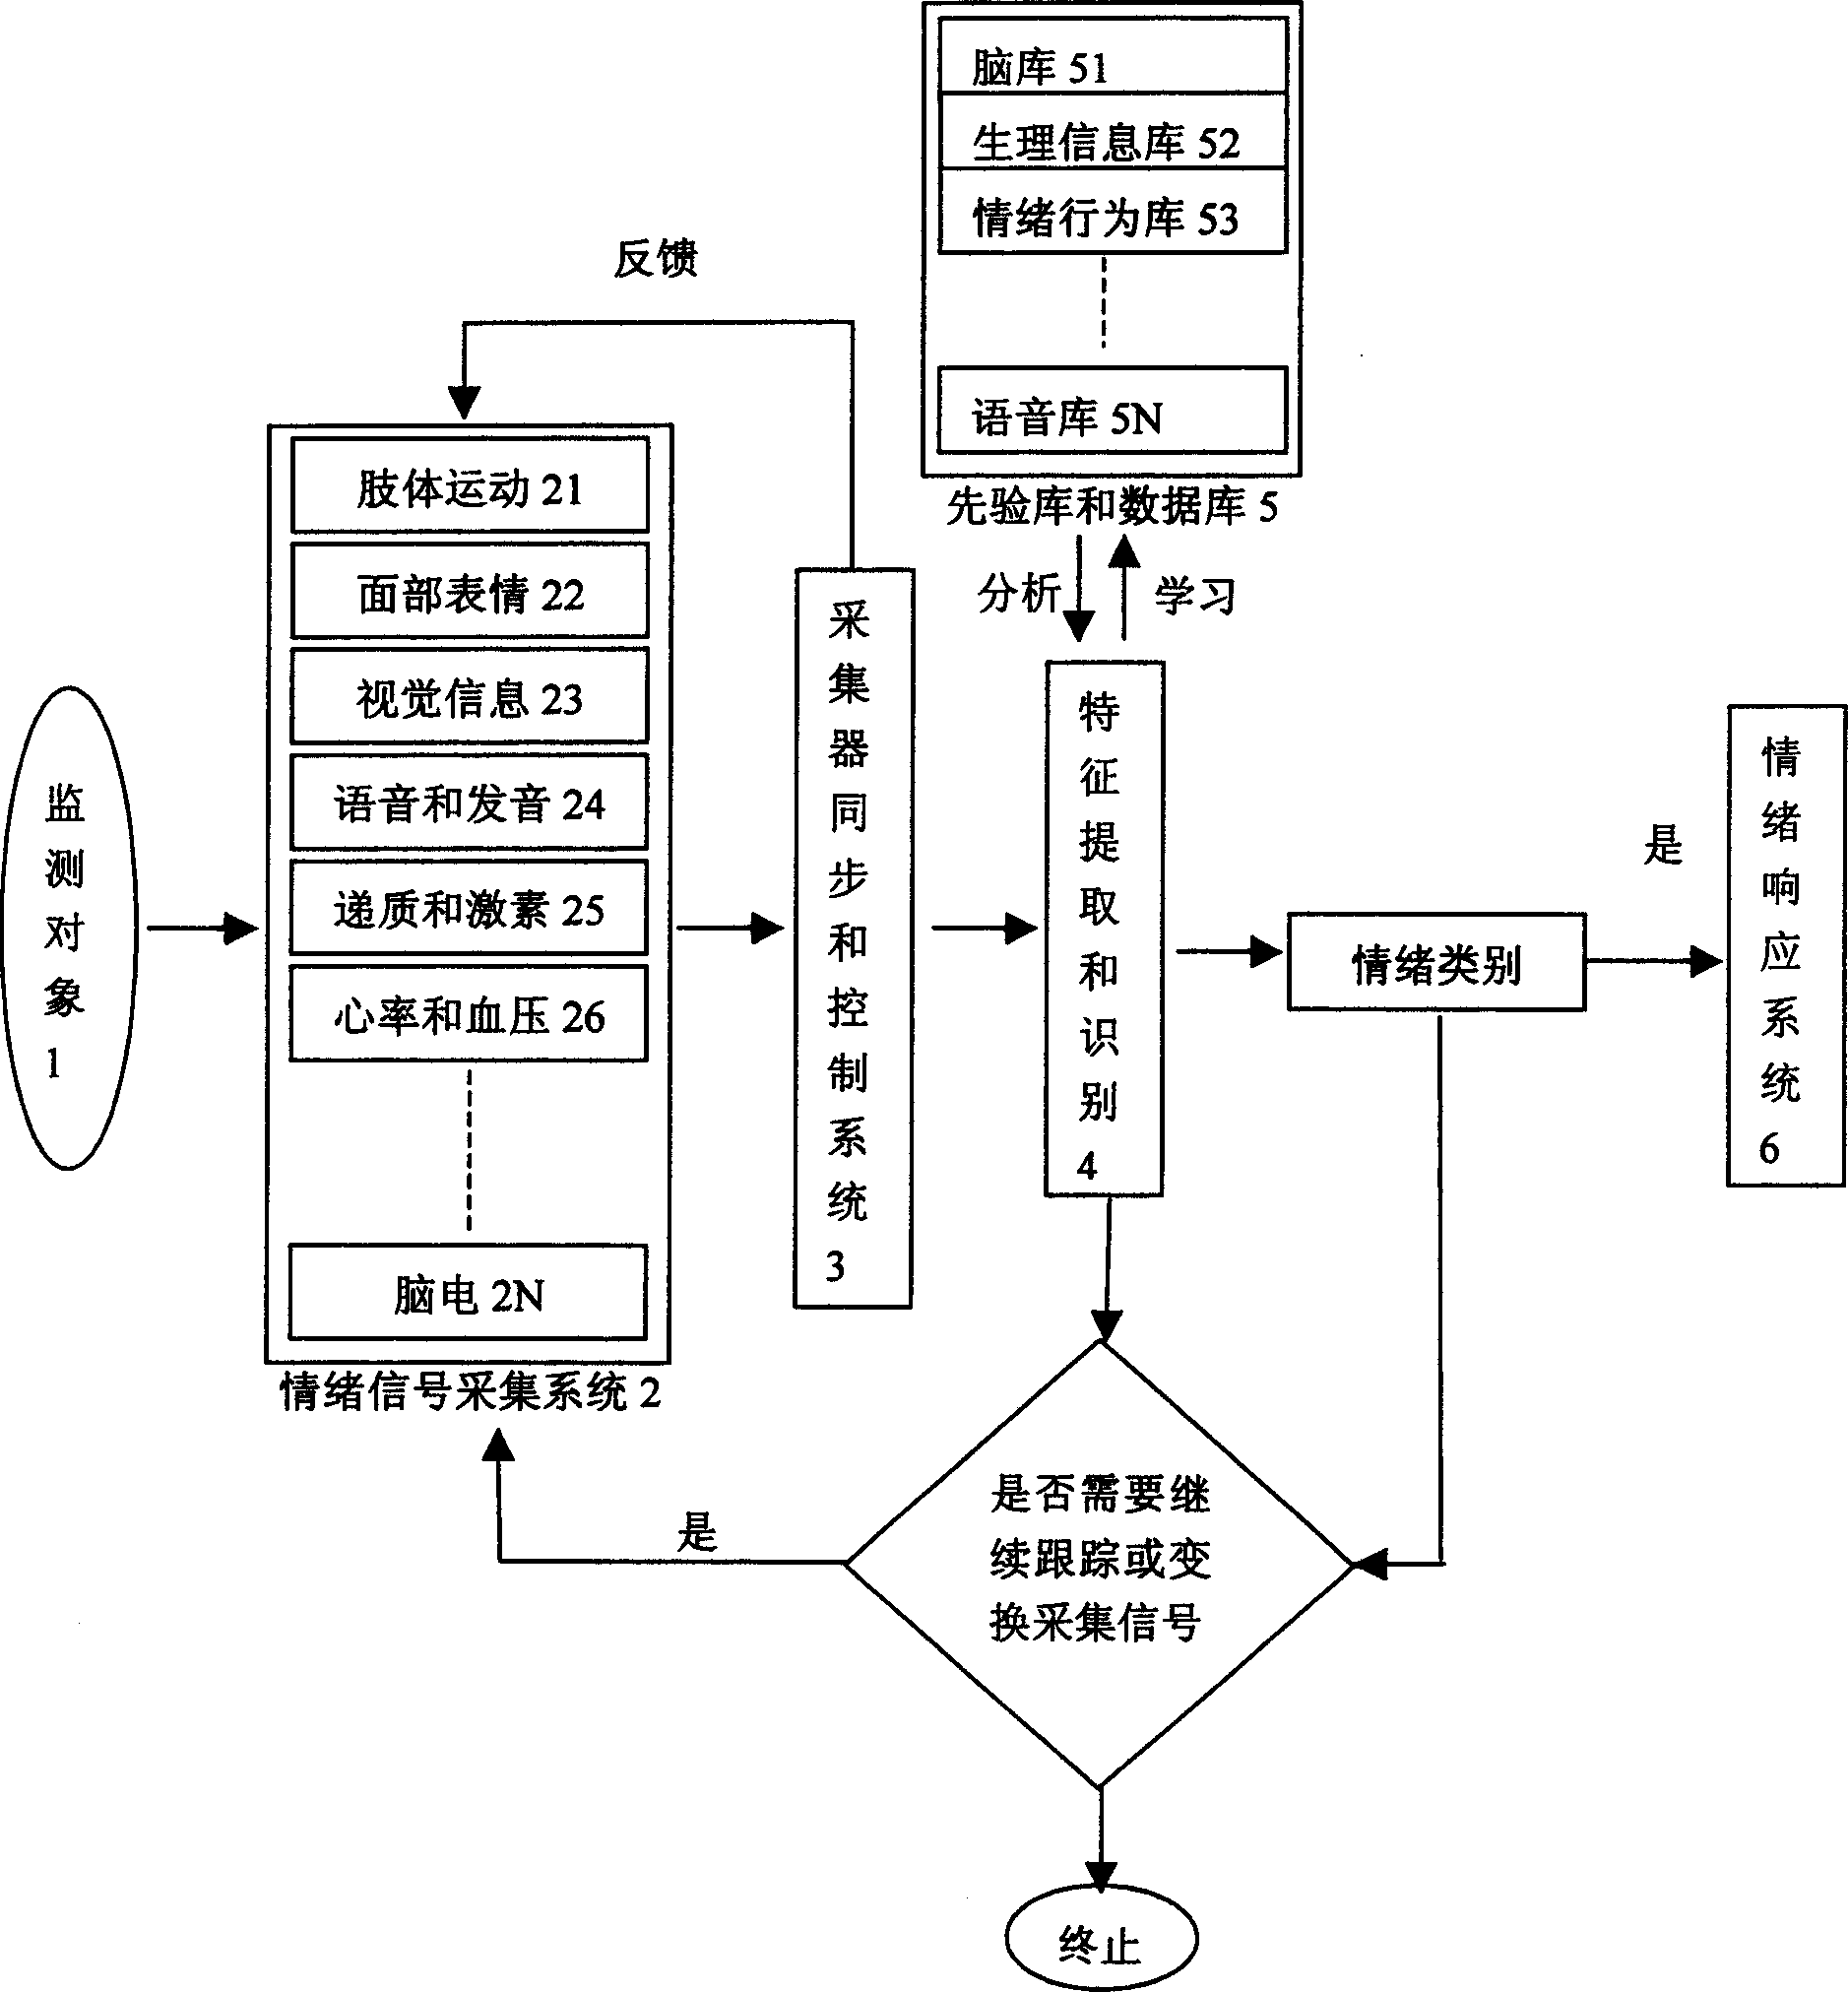 Method for constituting man-machine interface using humen's sentiment and sentiment variation information